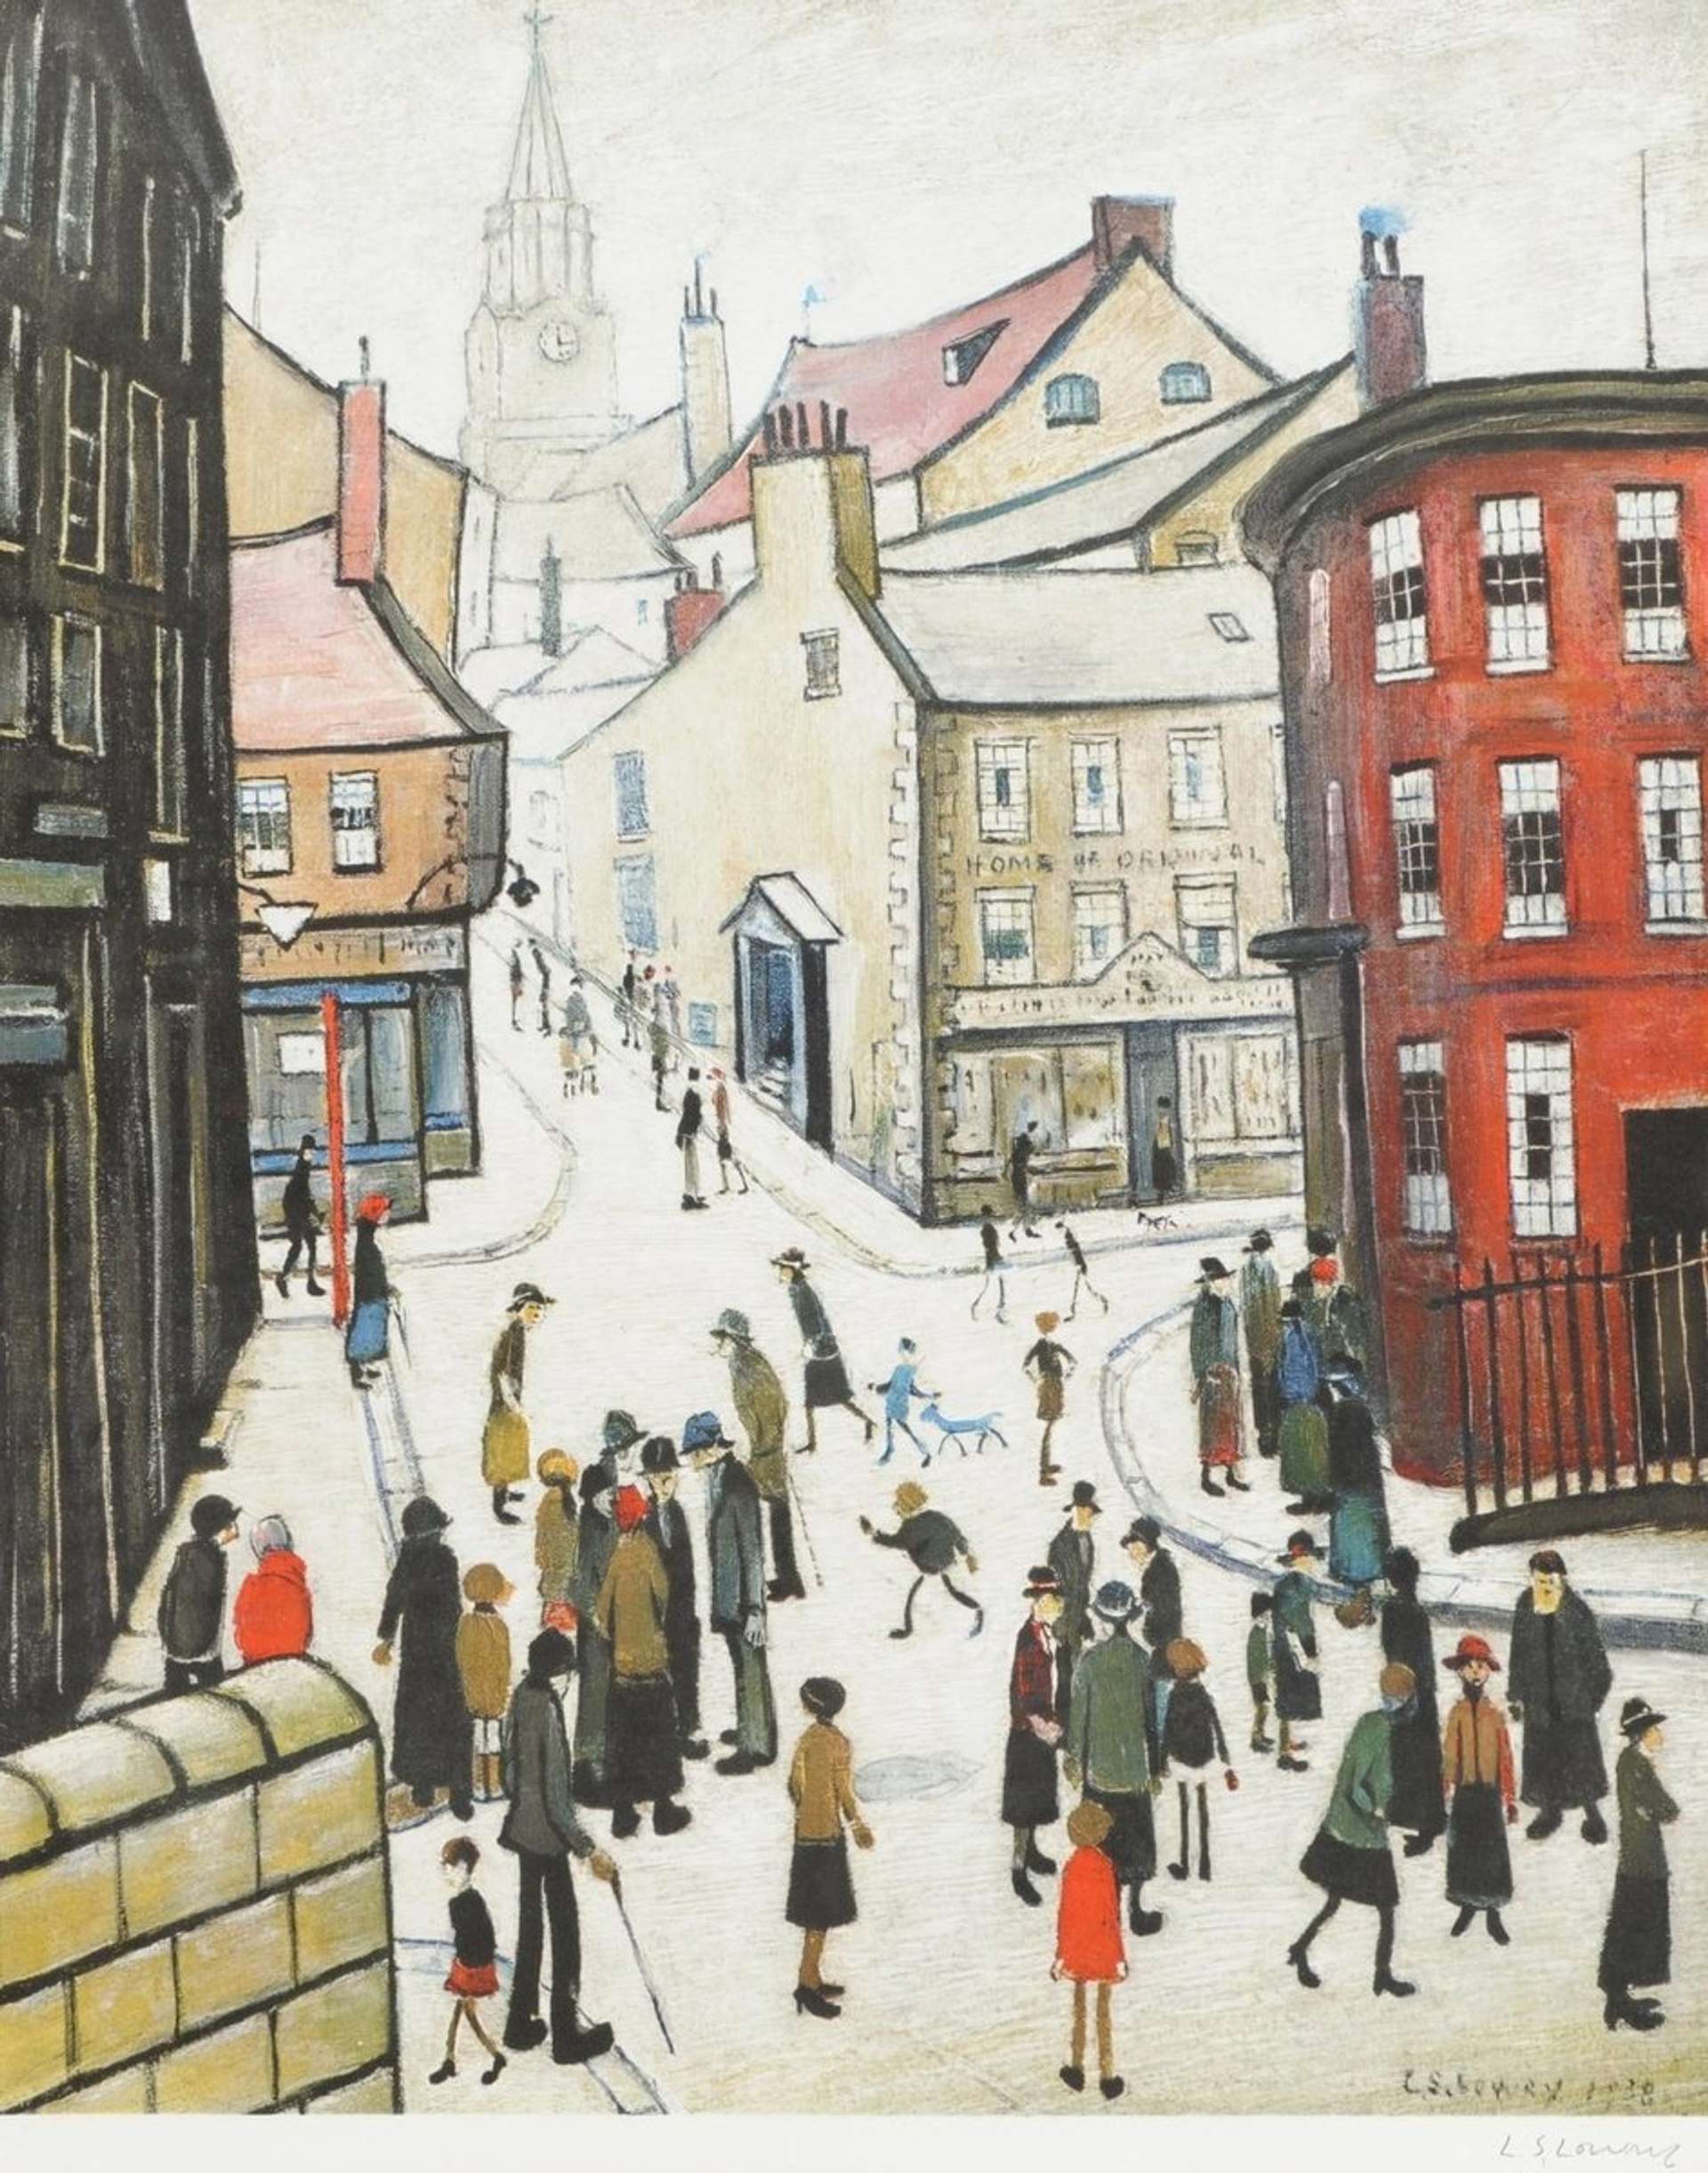 The Expert Guide To Selling A Lowry